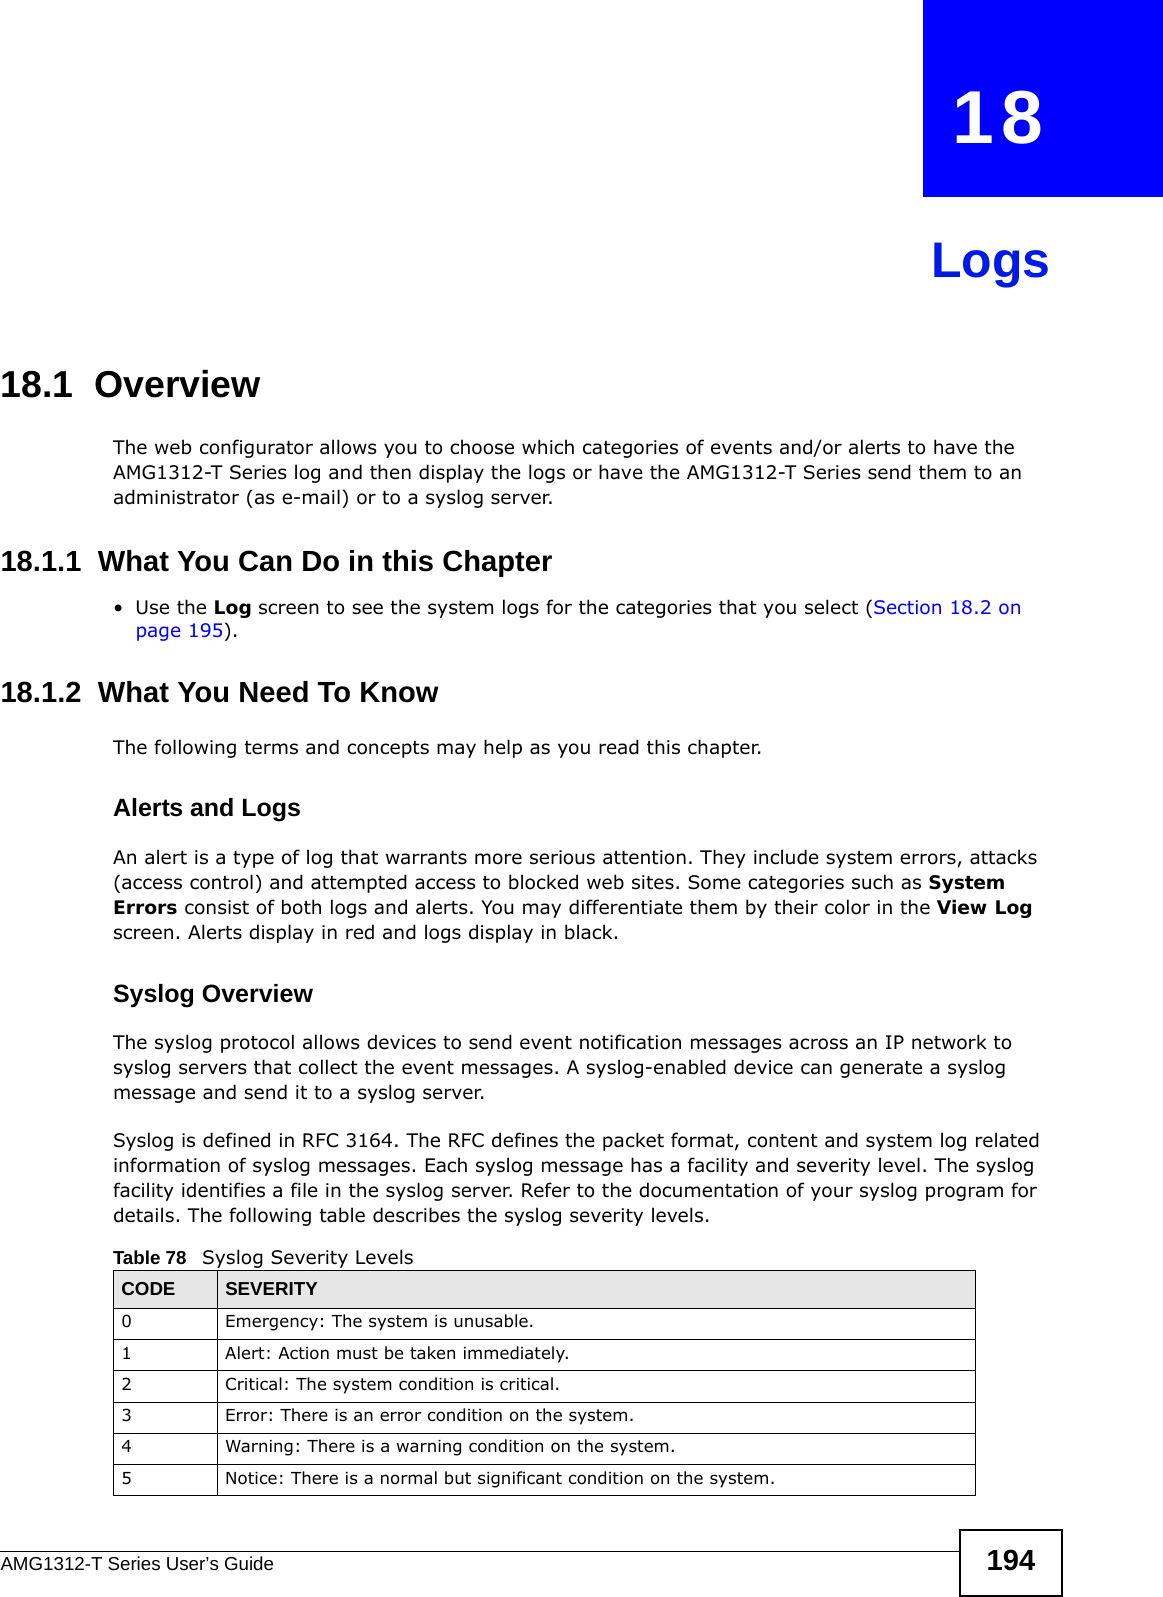 AMG1312-T Series User’s Guide 194CHAPTER   18Logs18.1  Overview The web configurator allows you to choose which categories of events and/or alerts to have the AMG1312-T Series log and then display the logs or have the AMG1312-T Series send them to an administrator (as e-mail) or to a syslog server. 18.1.1  What You Can Do in this Chapter•Use the Log screen to see the system logs for the categories that you select (Section 18.2 on page 195).18.1.2  What You Need To KnowThe following terms and concepts may help as you read this chapter.Alerts and LogsAn alert is a type of log that warrants more serious attention. They include system errors, attacks (access control) and attempted access to blocked web sites. Some categories such as System Errors consist of both logs and alerts. You may differentiate them by their color in the View Log screen. Alerts display in red and logs display in black.Syslog Overview The syslog protocol allows devices to send event notification messages across an IP network to syslog servers that collect the event messages. A syslog-enabled device can generate a syslog message and send it to a syslog server.Syslog is defined in RFC 3164. The RFC defines the packet format, content and system log related information of syslog messages. Each syslog message has a facility and severity level. The syslog facility identifies a file in the syslog server. Refer to the documentation of your syslog program for details. The following table describes the syslog severity levels. Table 78   Syslog Severity LevelsCODE SEVERITY0 Emergency: The system is unusable.1 Alert: Action must be taken immediately.2 Critical: The system condition is critical.3 Error: There is an error condition on the system.4 Warning: There is a warning condition on the system.5 Notice: There is a normal but significant condition on the system.